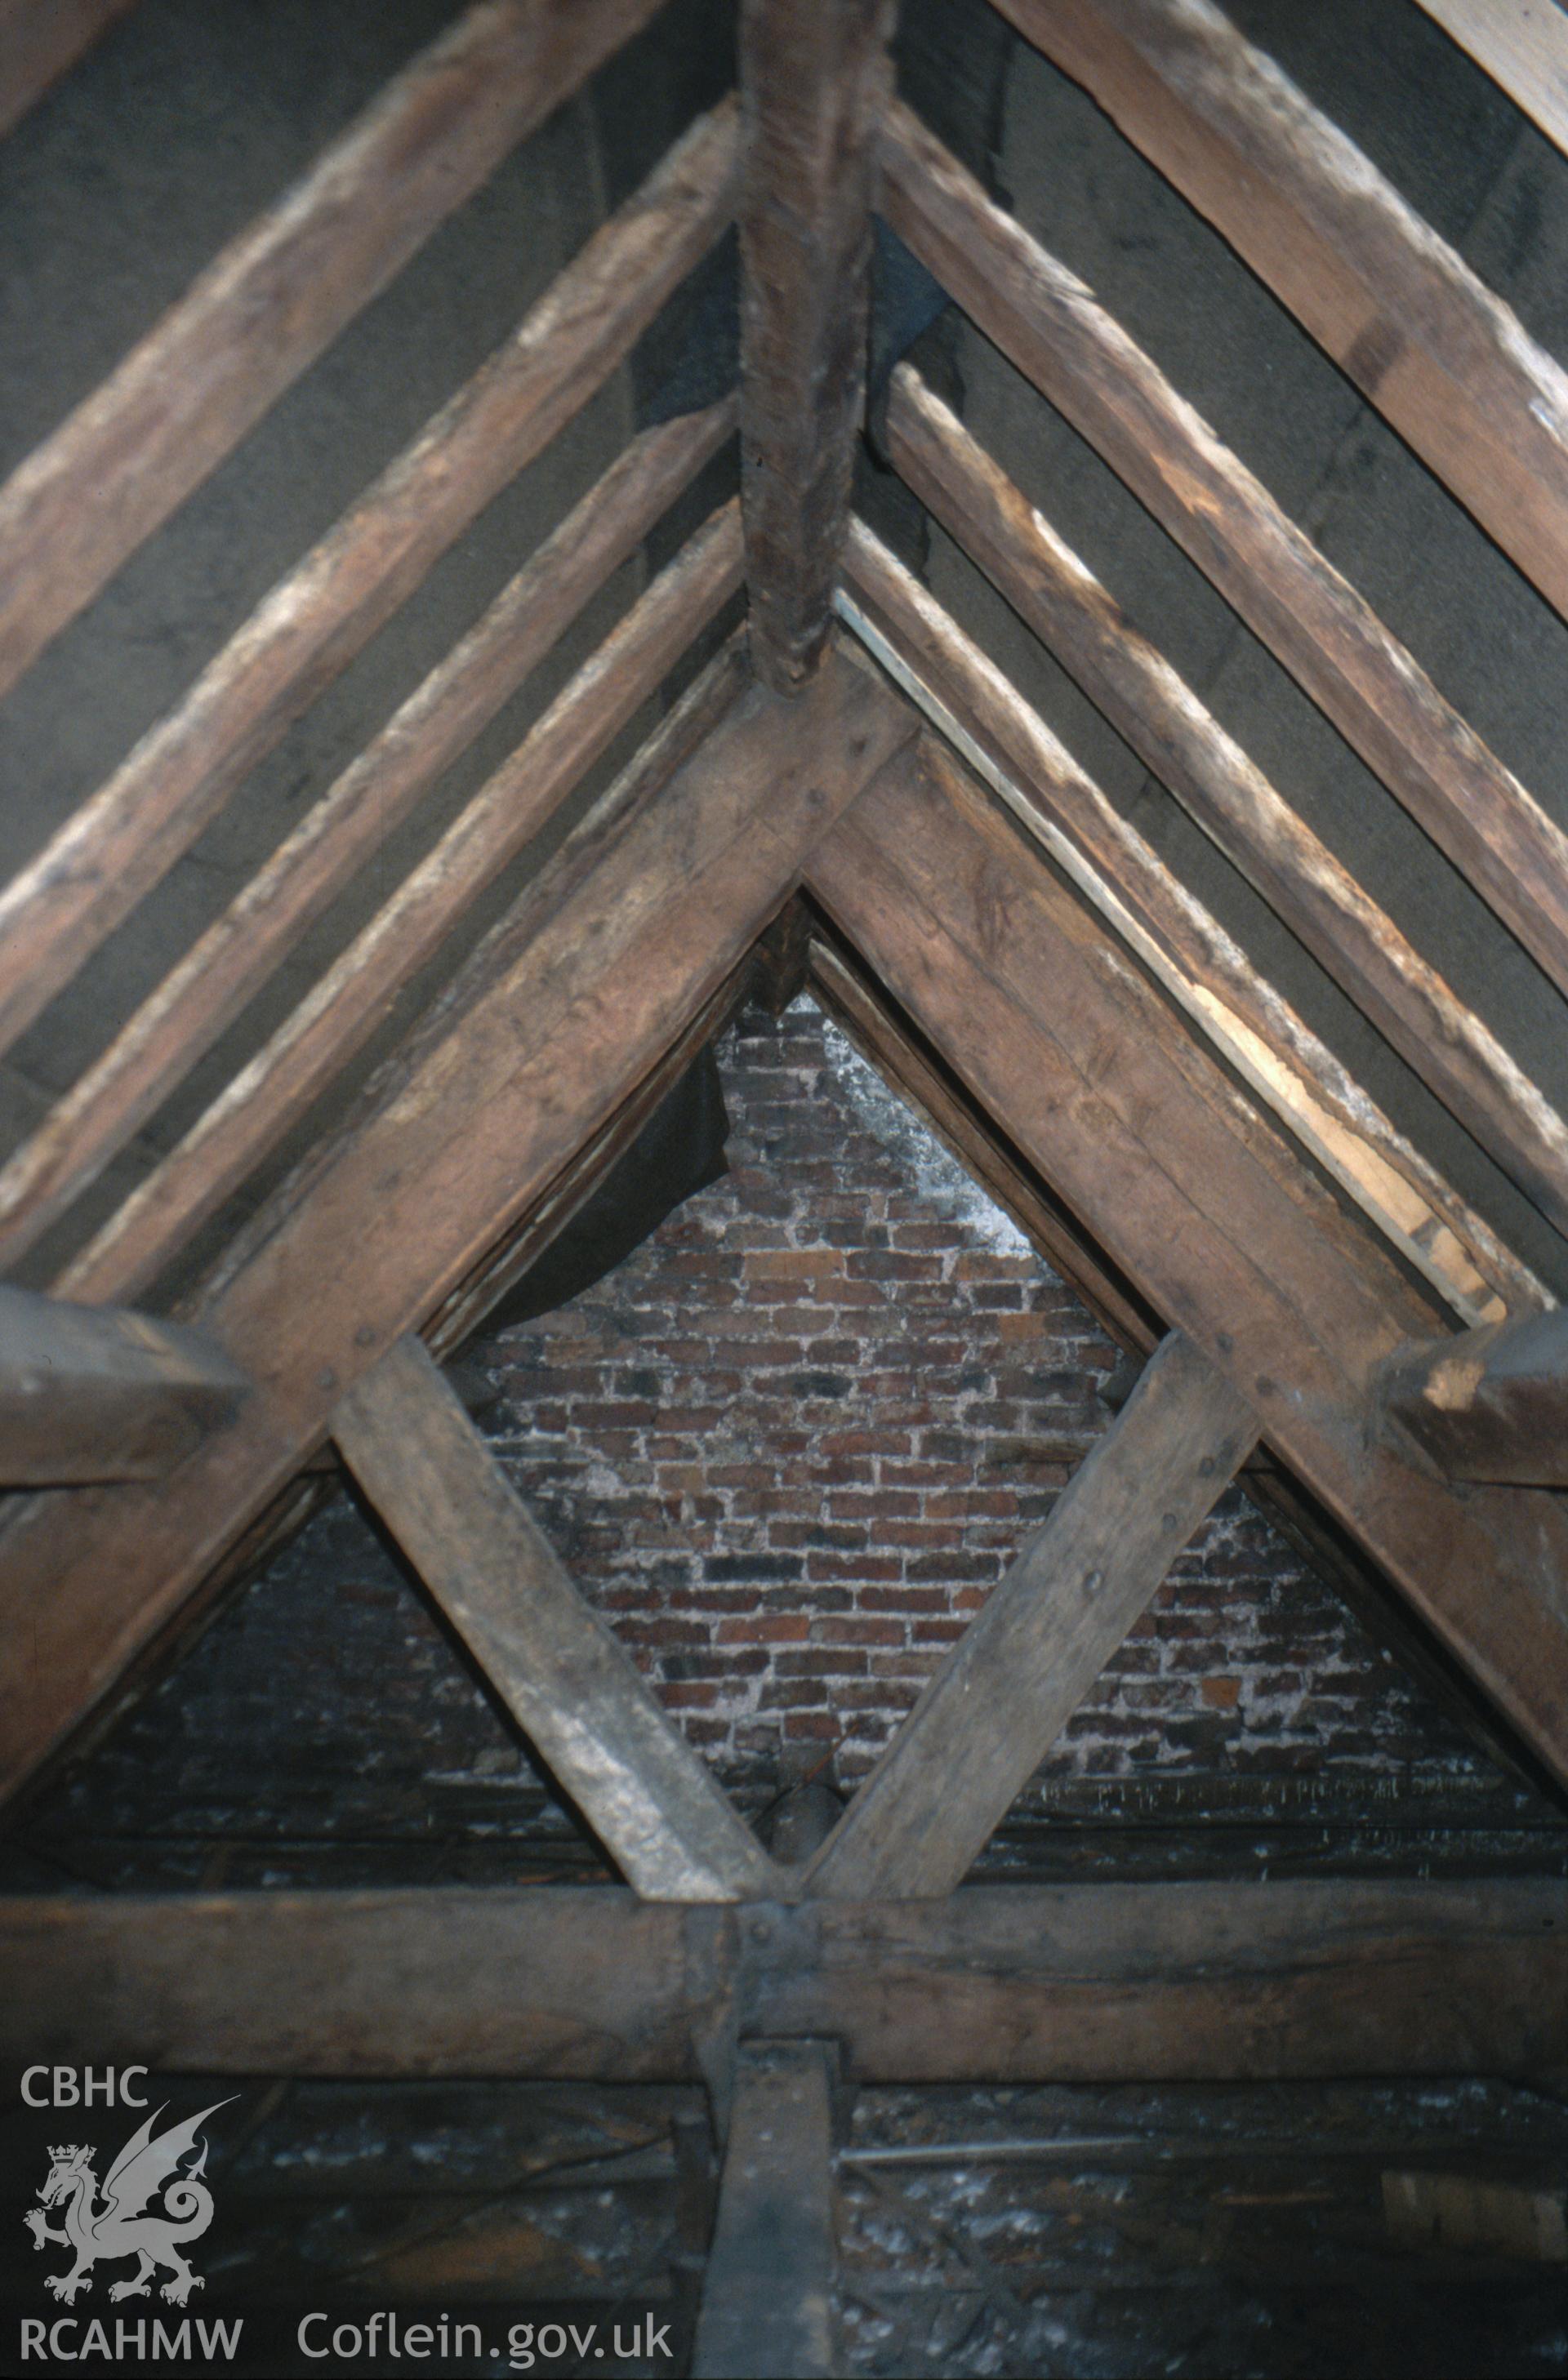 Interior view showing the arched-braced truss in 1666 brick wing.